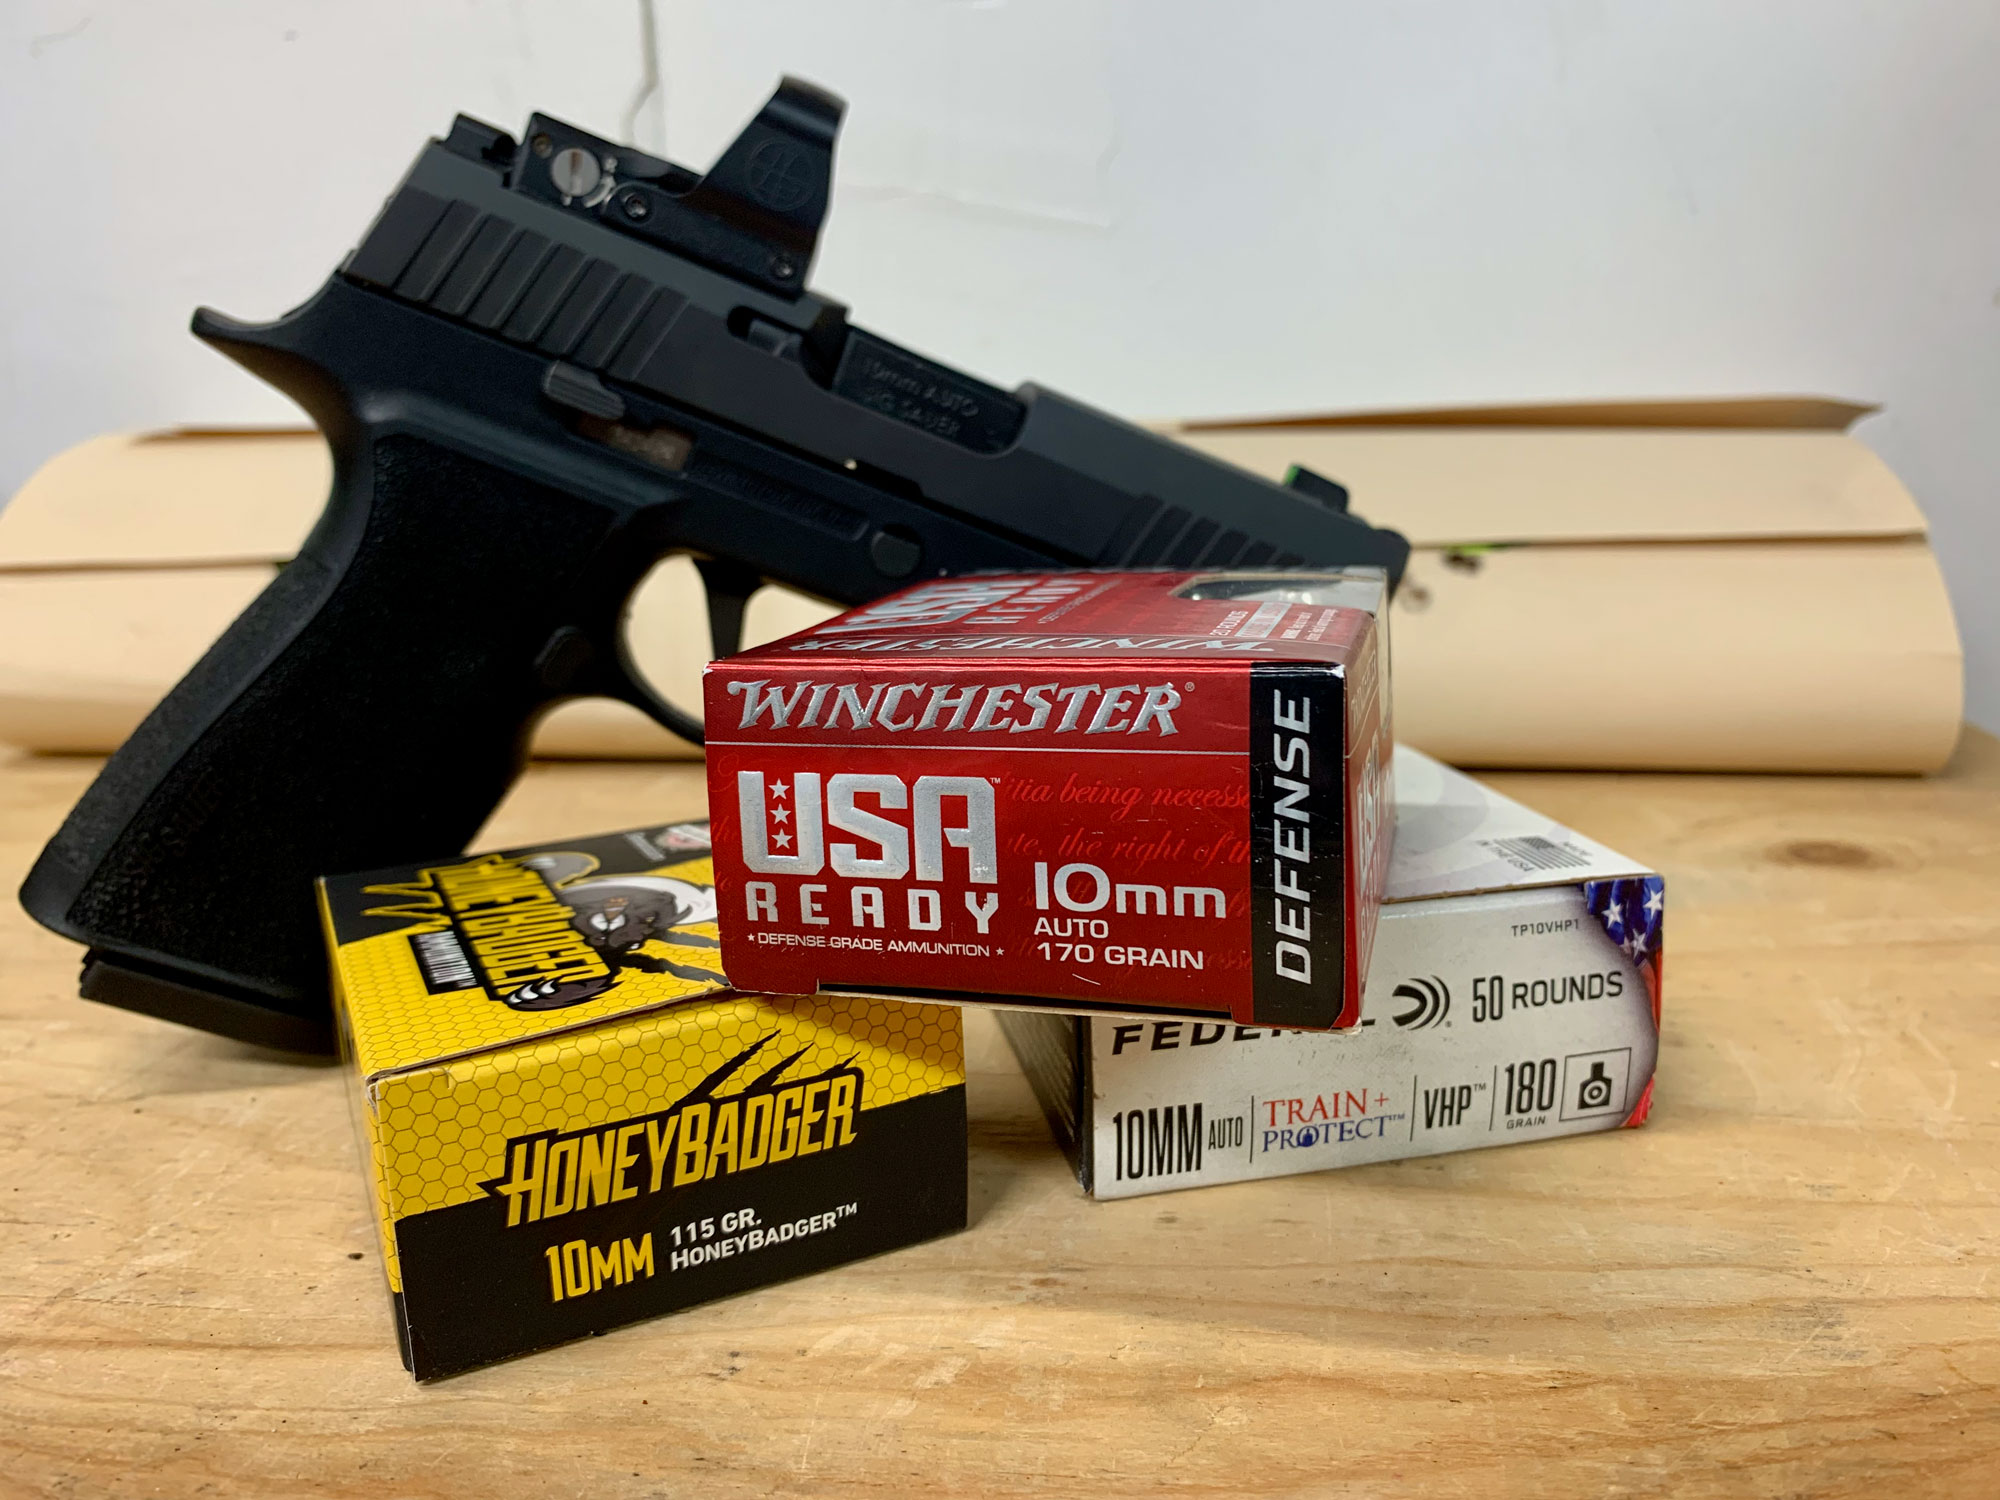 Sig P320 XTen ammo from accuracy testing